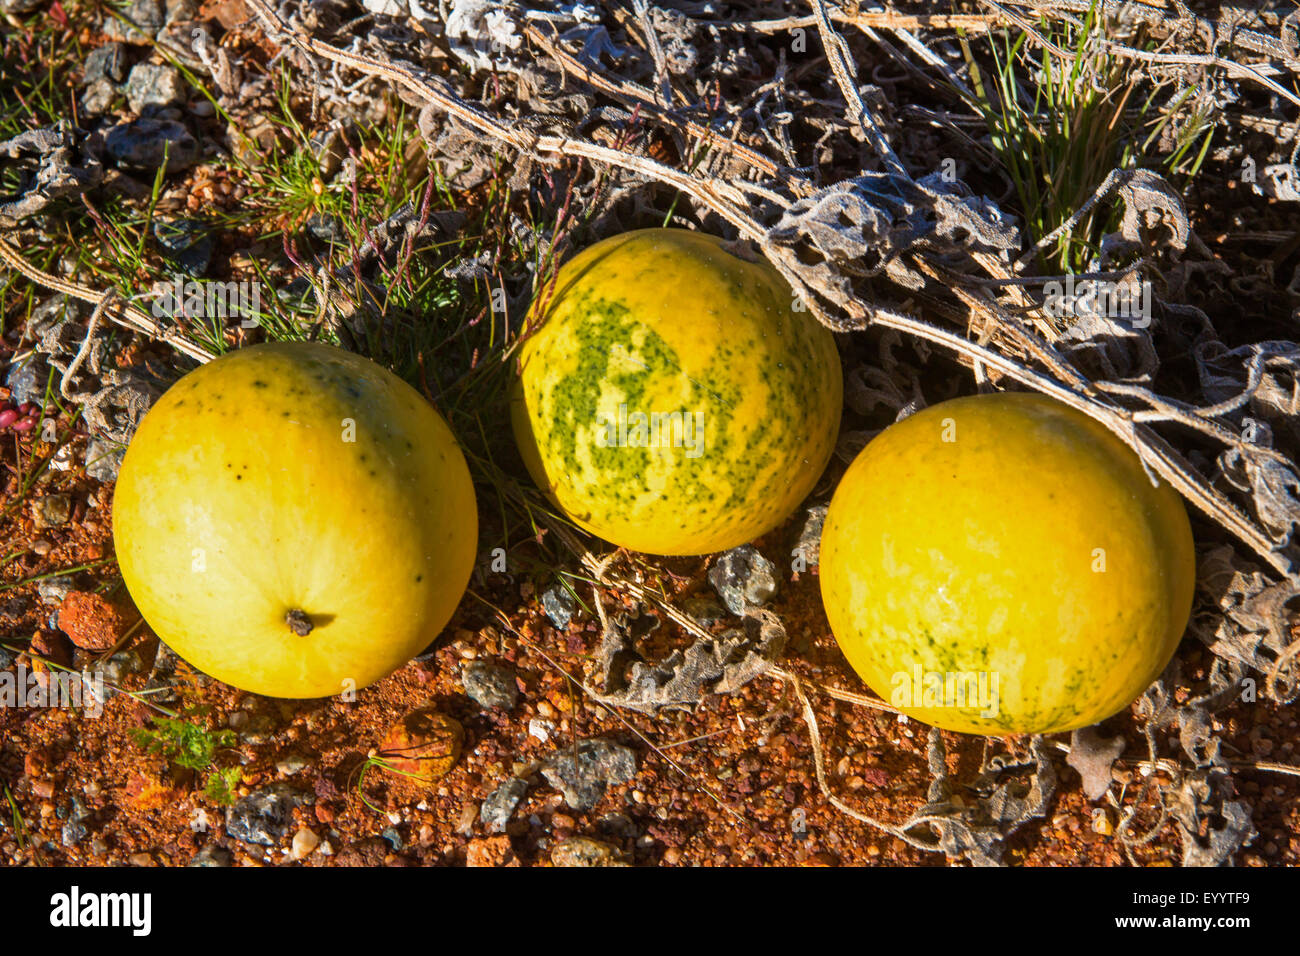 bitter apple, colocynth (Citrullus colocynthis), three fruits at a roadside, Australia, Western Australia, Mount Magnet Sandstone Road Stock Photo